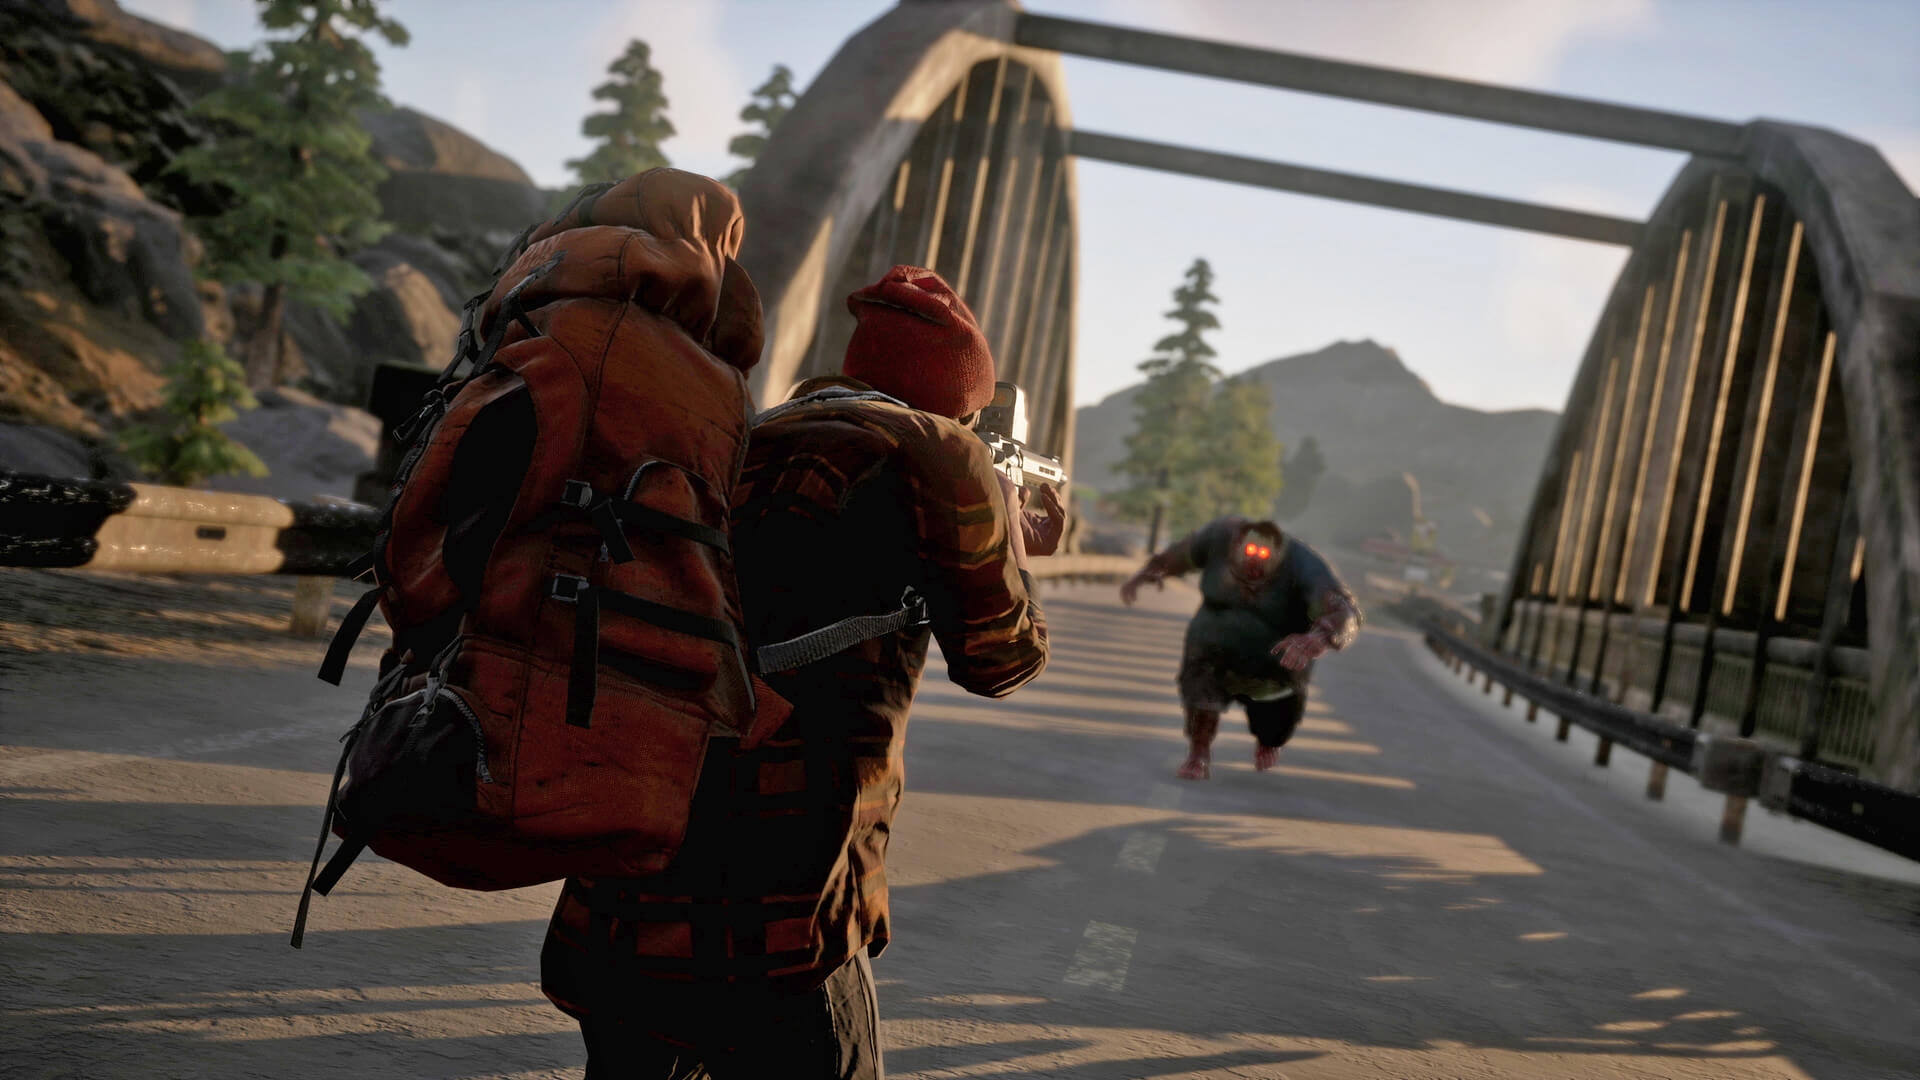 Horde mode coming to State of Decay 2 with Daybreak DLC | PCGamesN